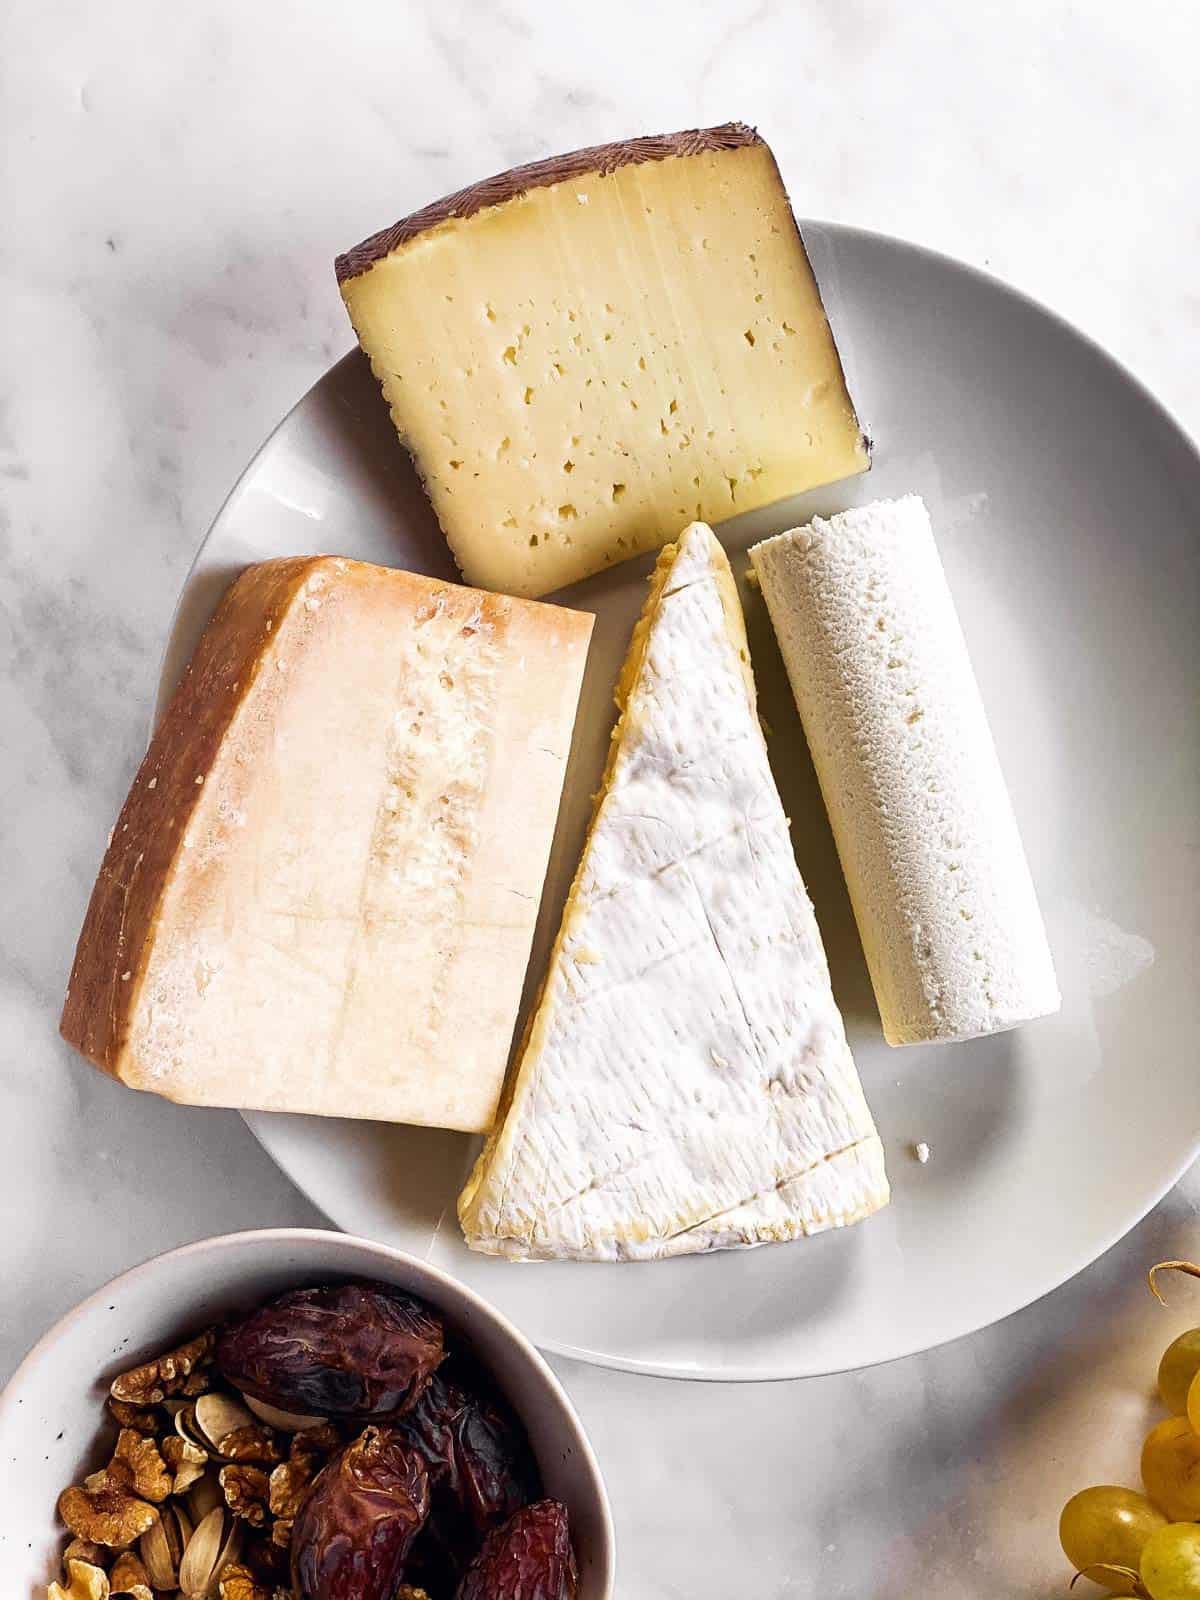 4 types of cheese on white plate